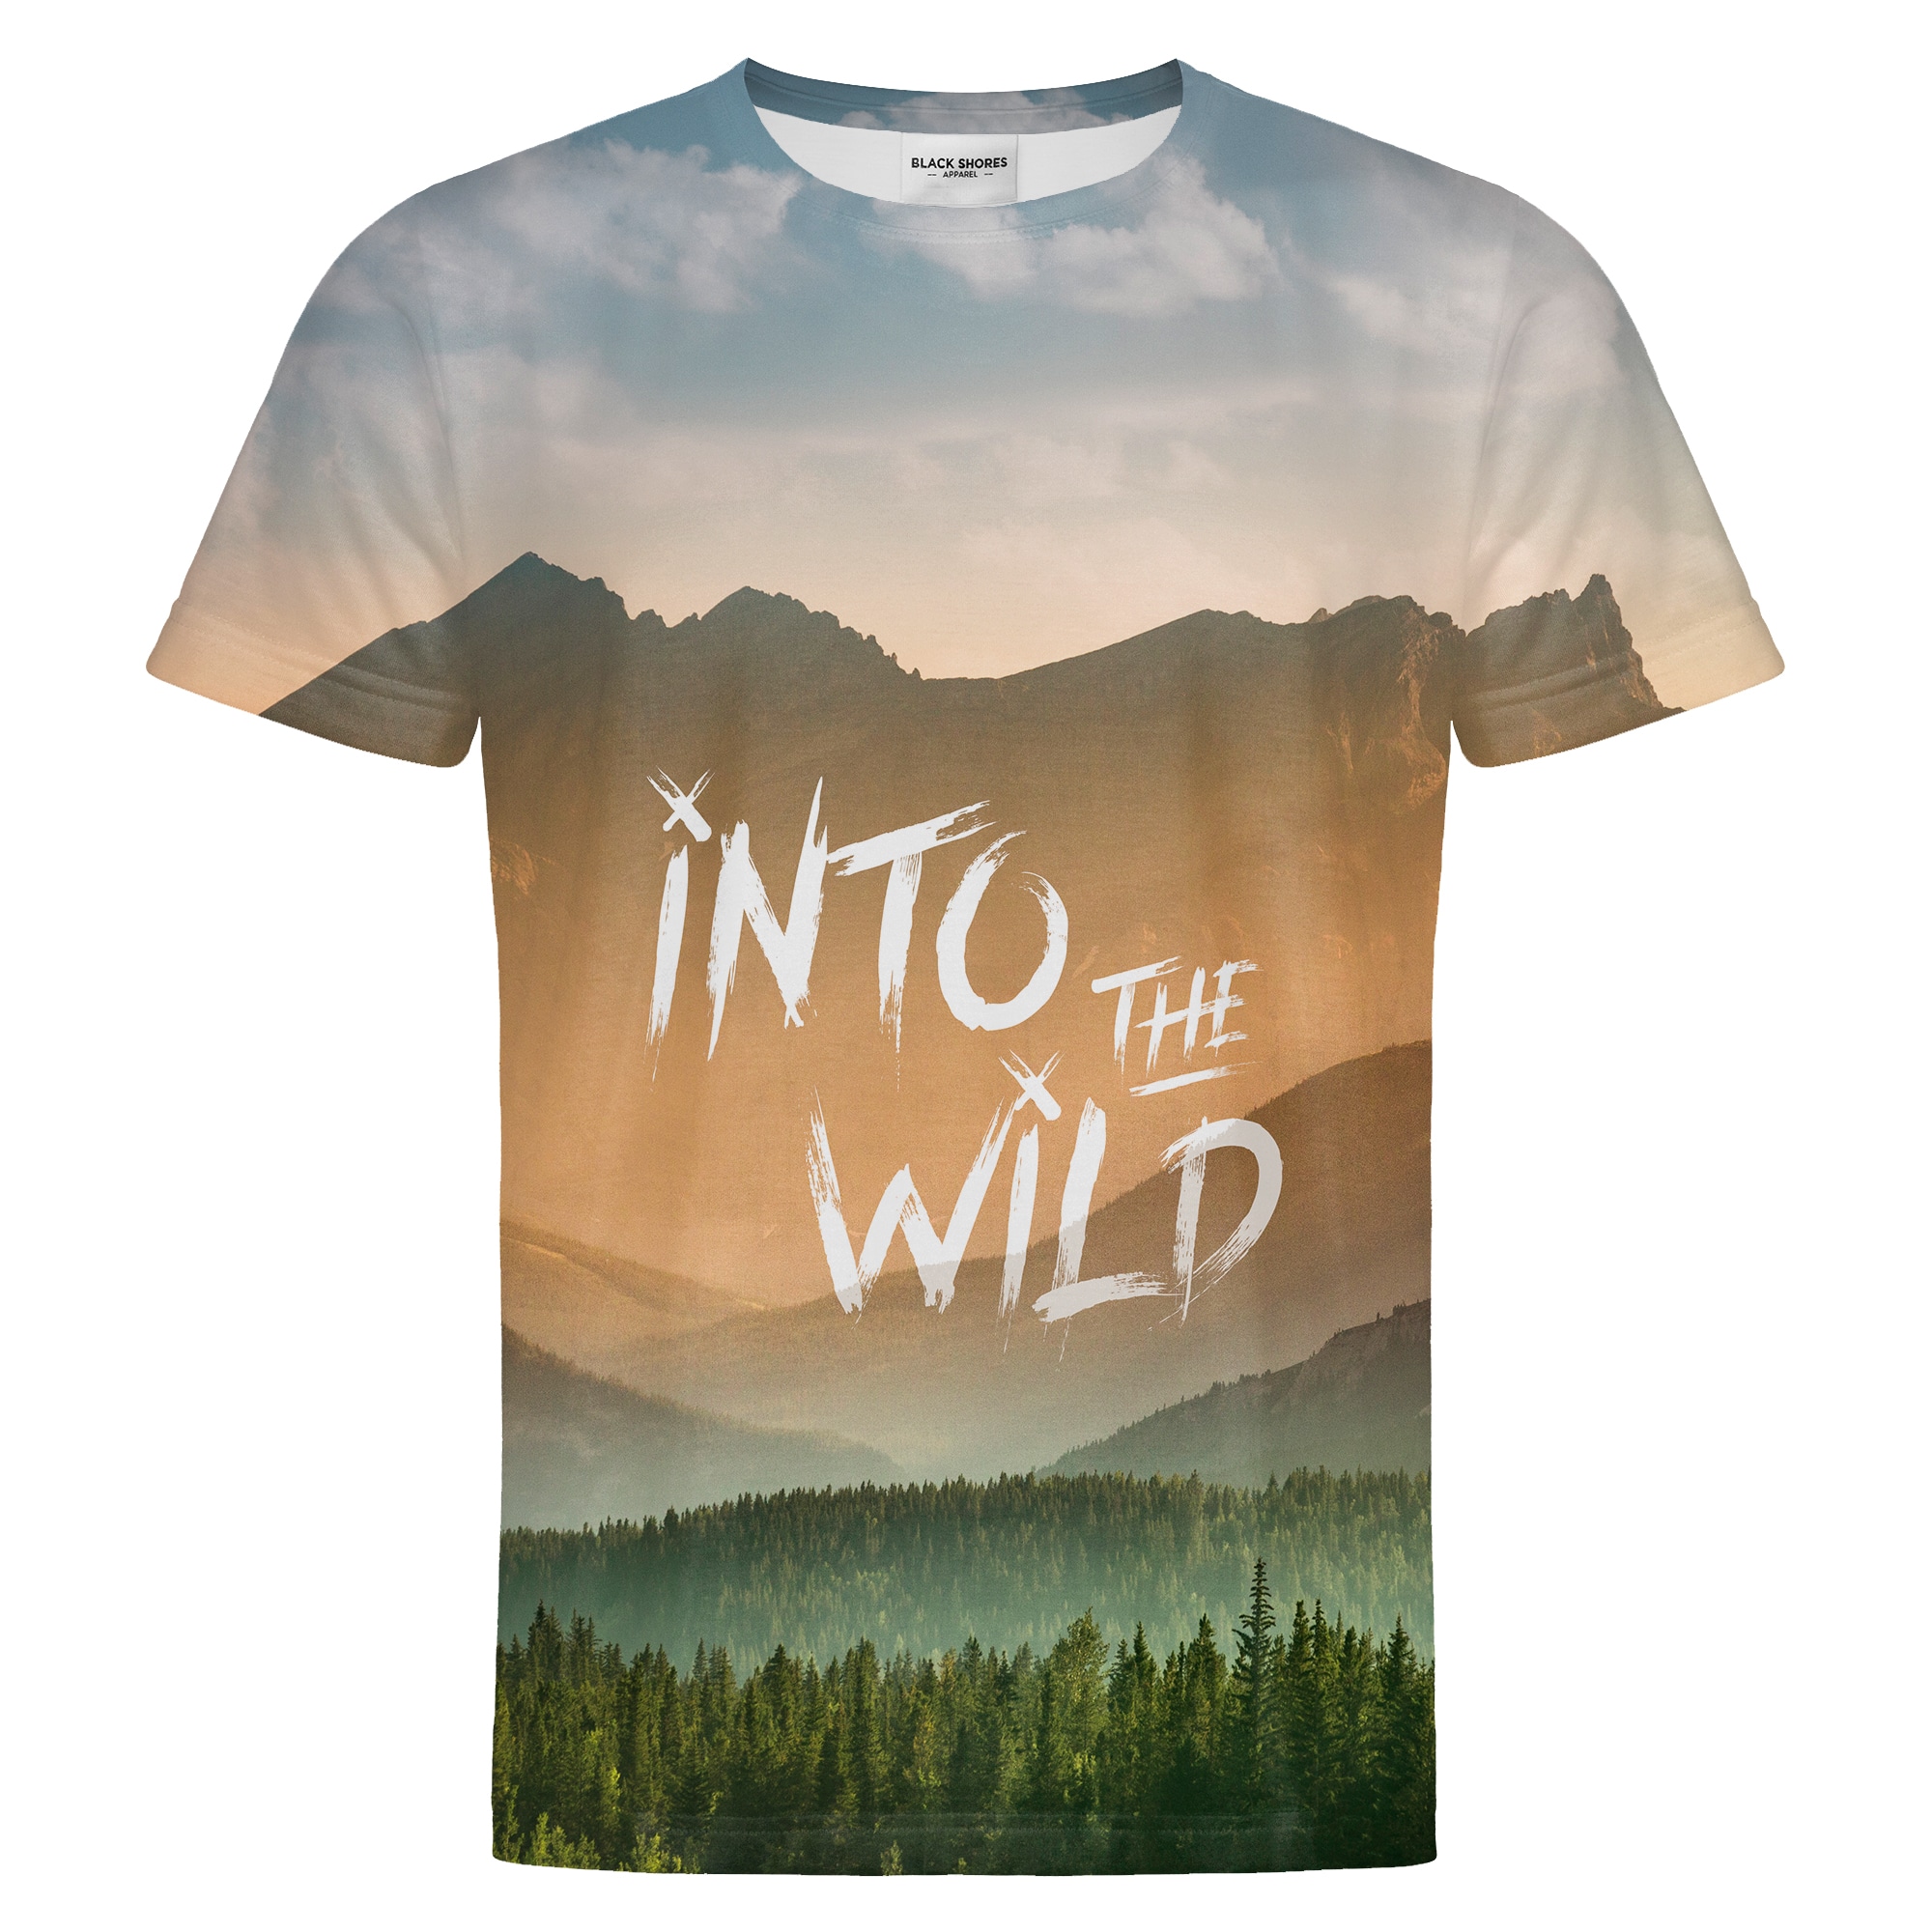 Into The Wild T-shirt – Black Shores - S